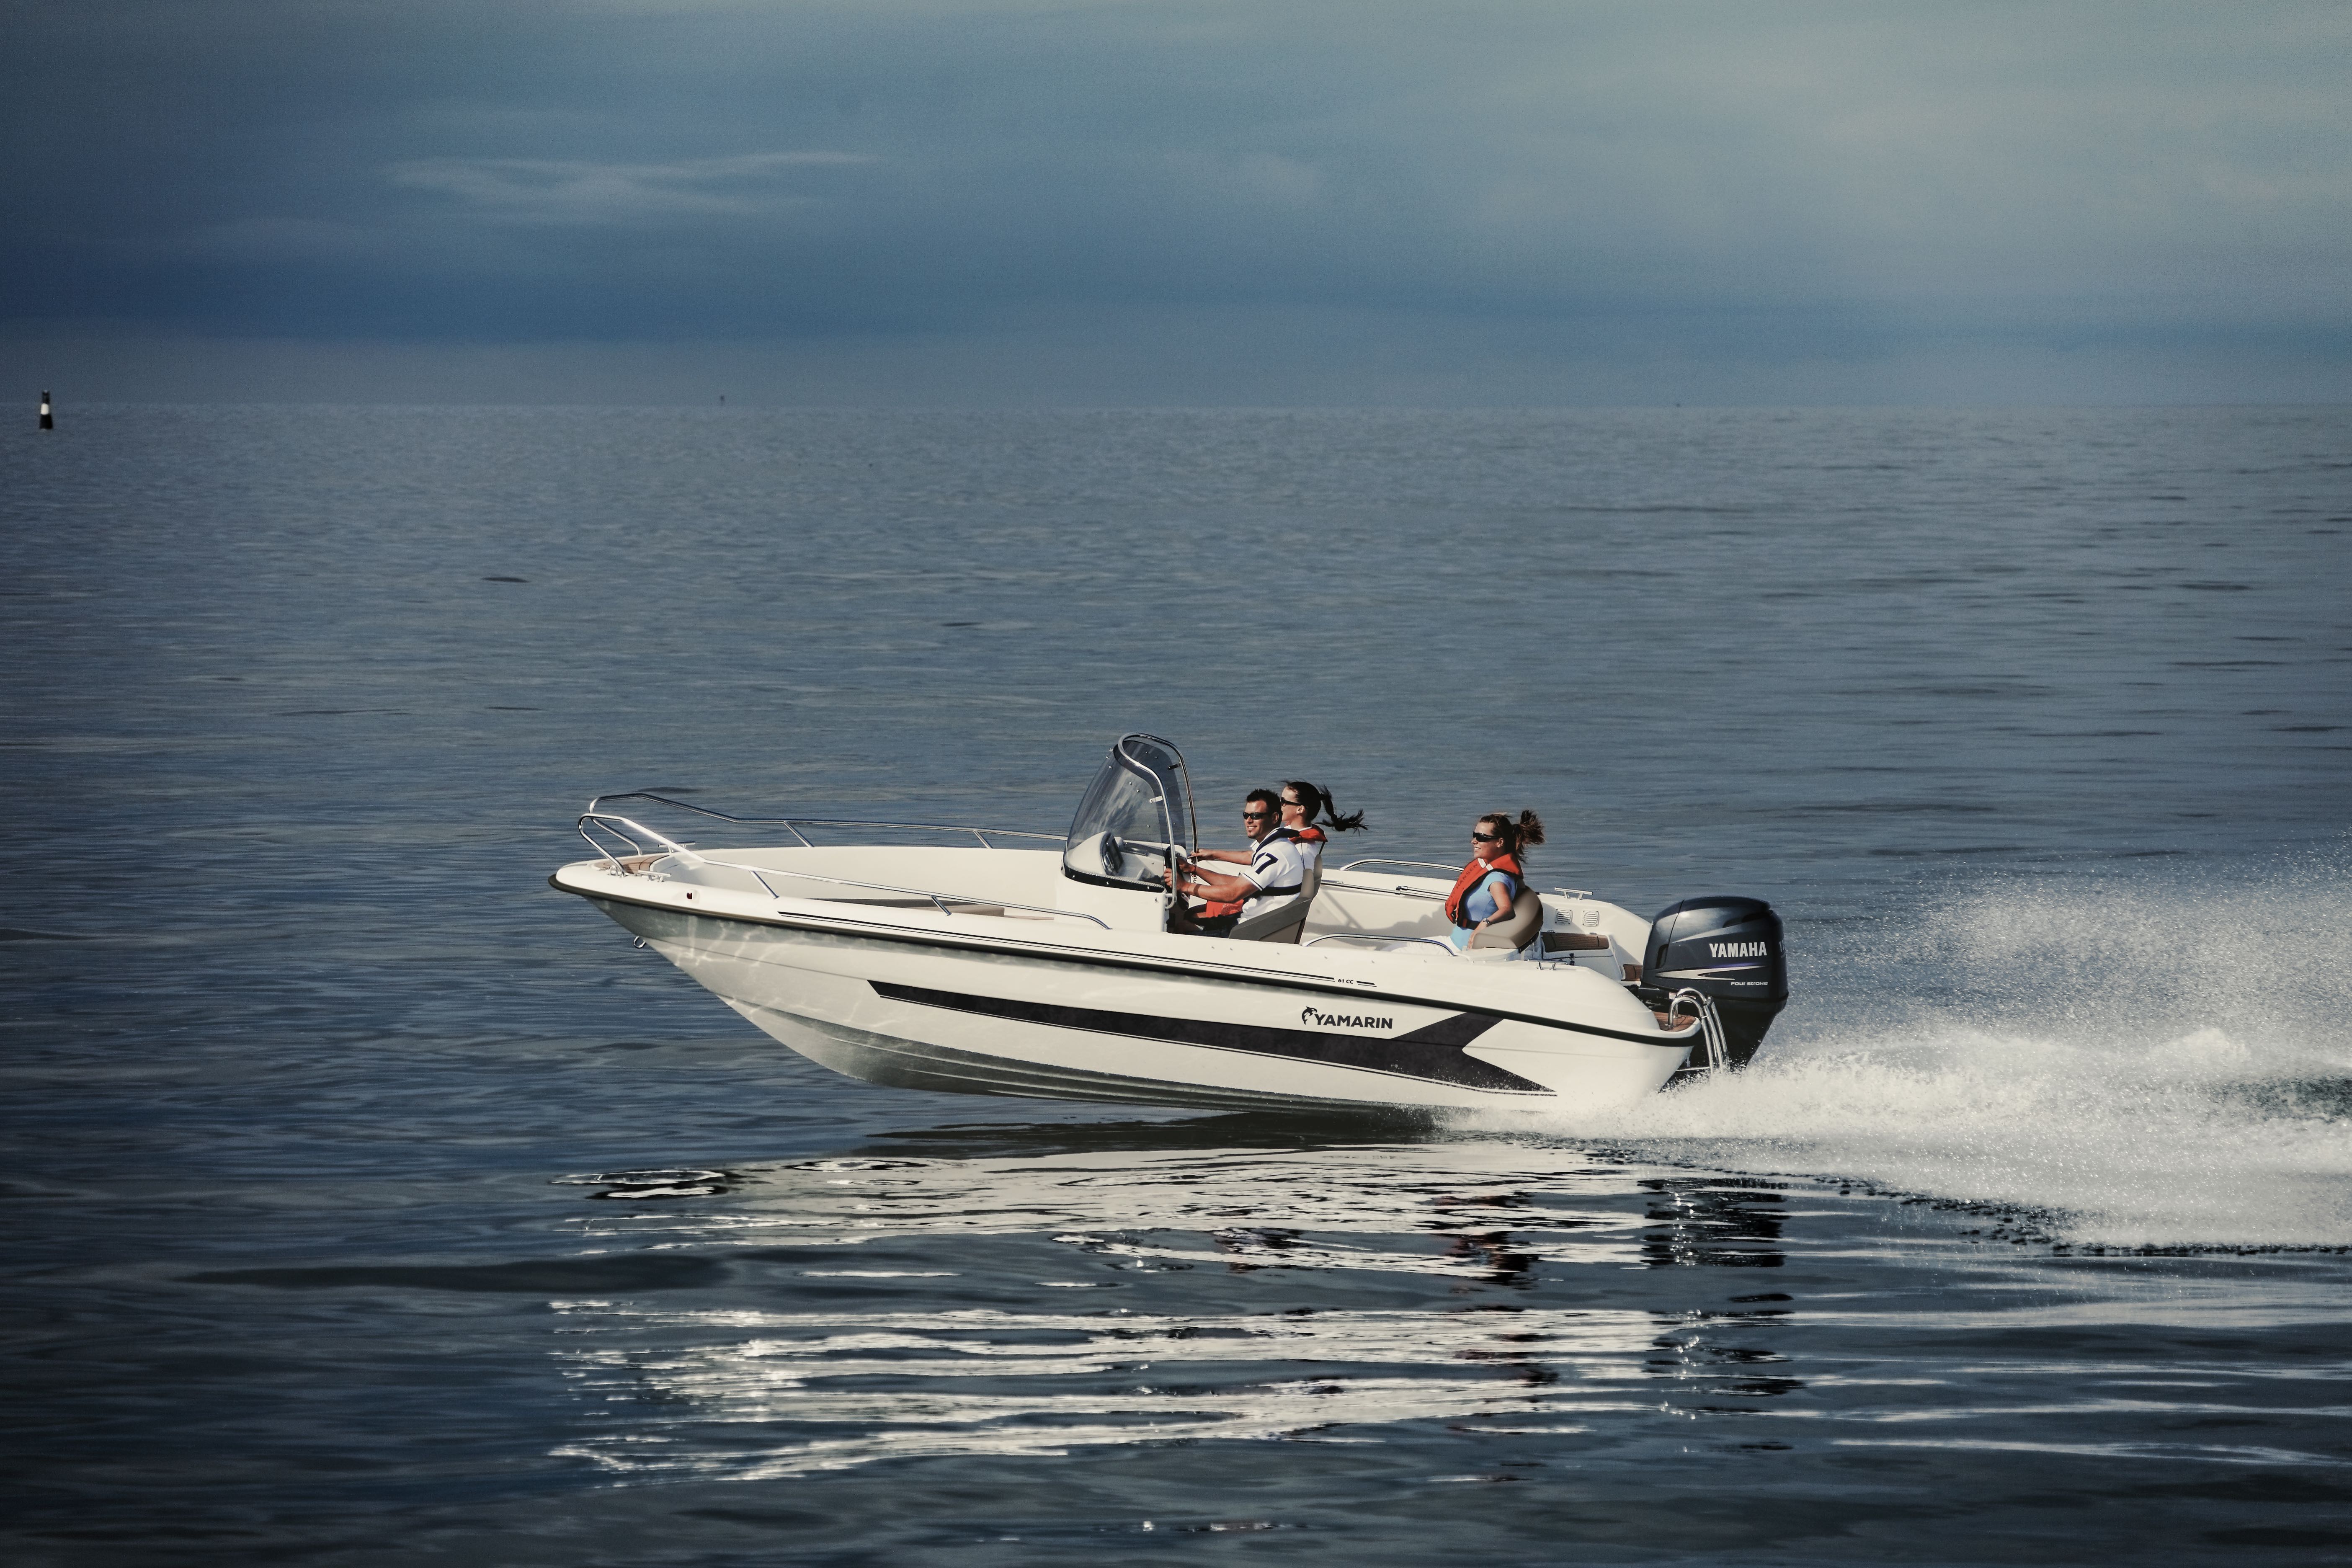 Yamarin 61 CC will be displayed at the Southampton Boat Show